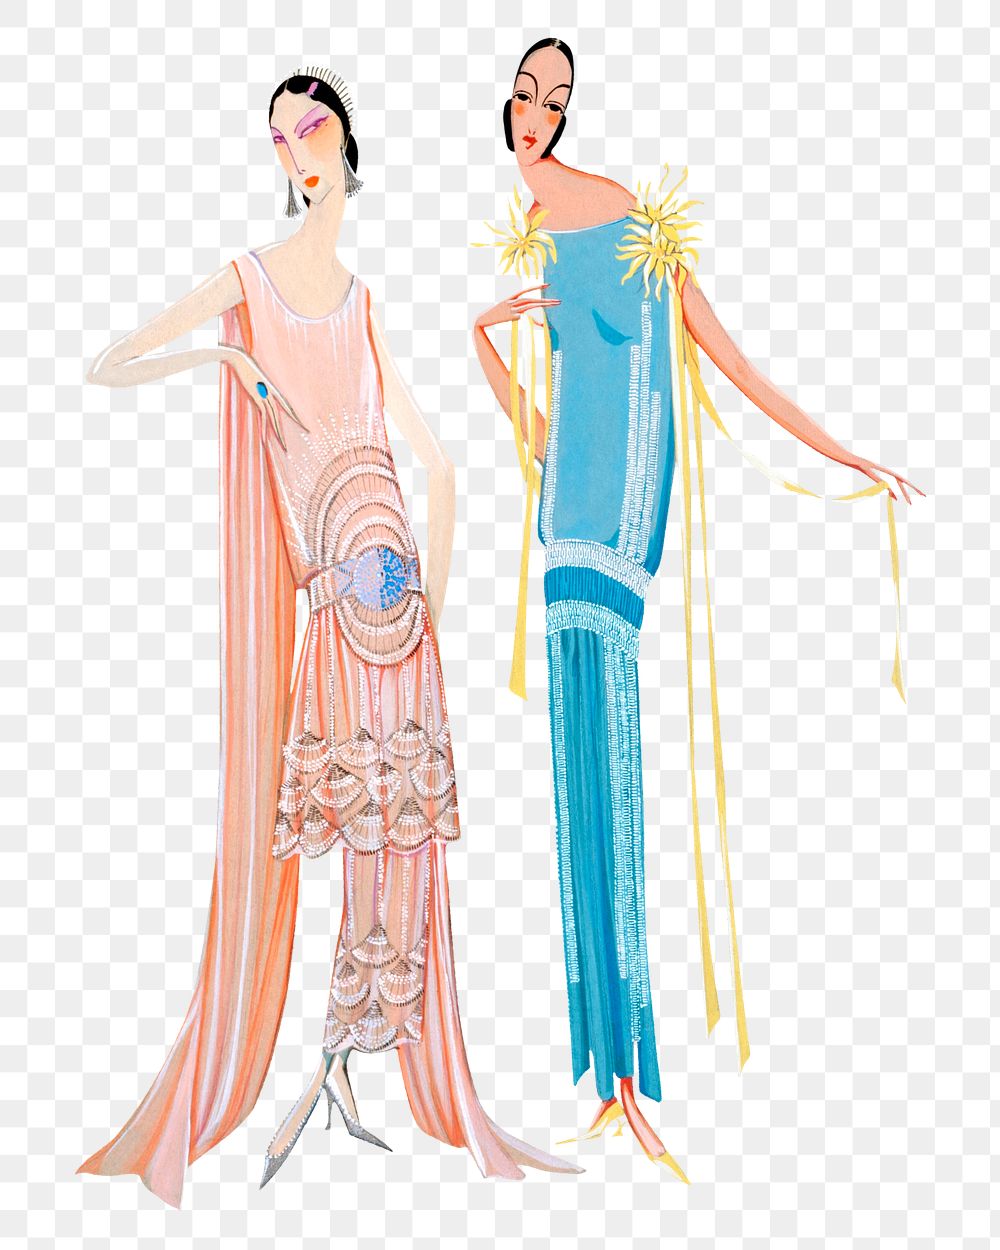 1920s women's dress png sticker on transparent background, remixed from the artwork of George Barbier